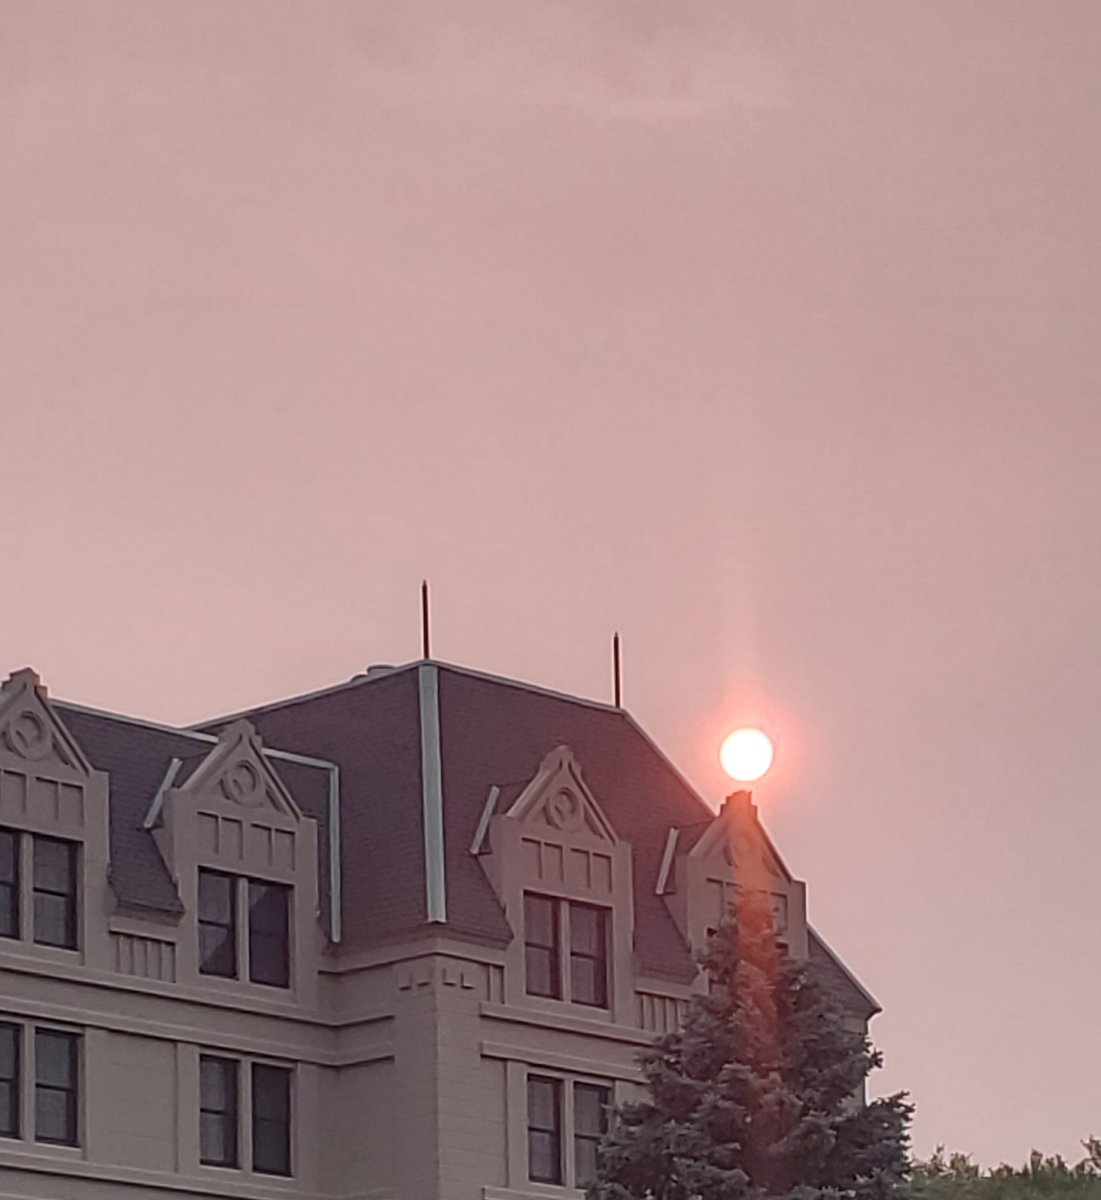 Catch this morning's eerie #sunrise in the #HudsonValley? Or was it #Tatooine?
#VisitHudsonValley #VisitTatooine #hudsonvalleysunrise #newyorksunrise #tatooinesunrise #haze #hazysunrise #wildfires #canadianwildfires #explorerockland #iloveny #TheChateauInTheCountryNearTheCity